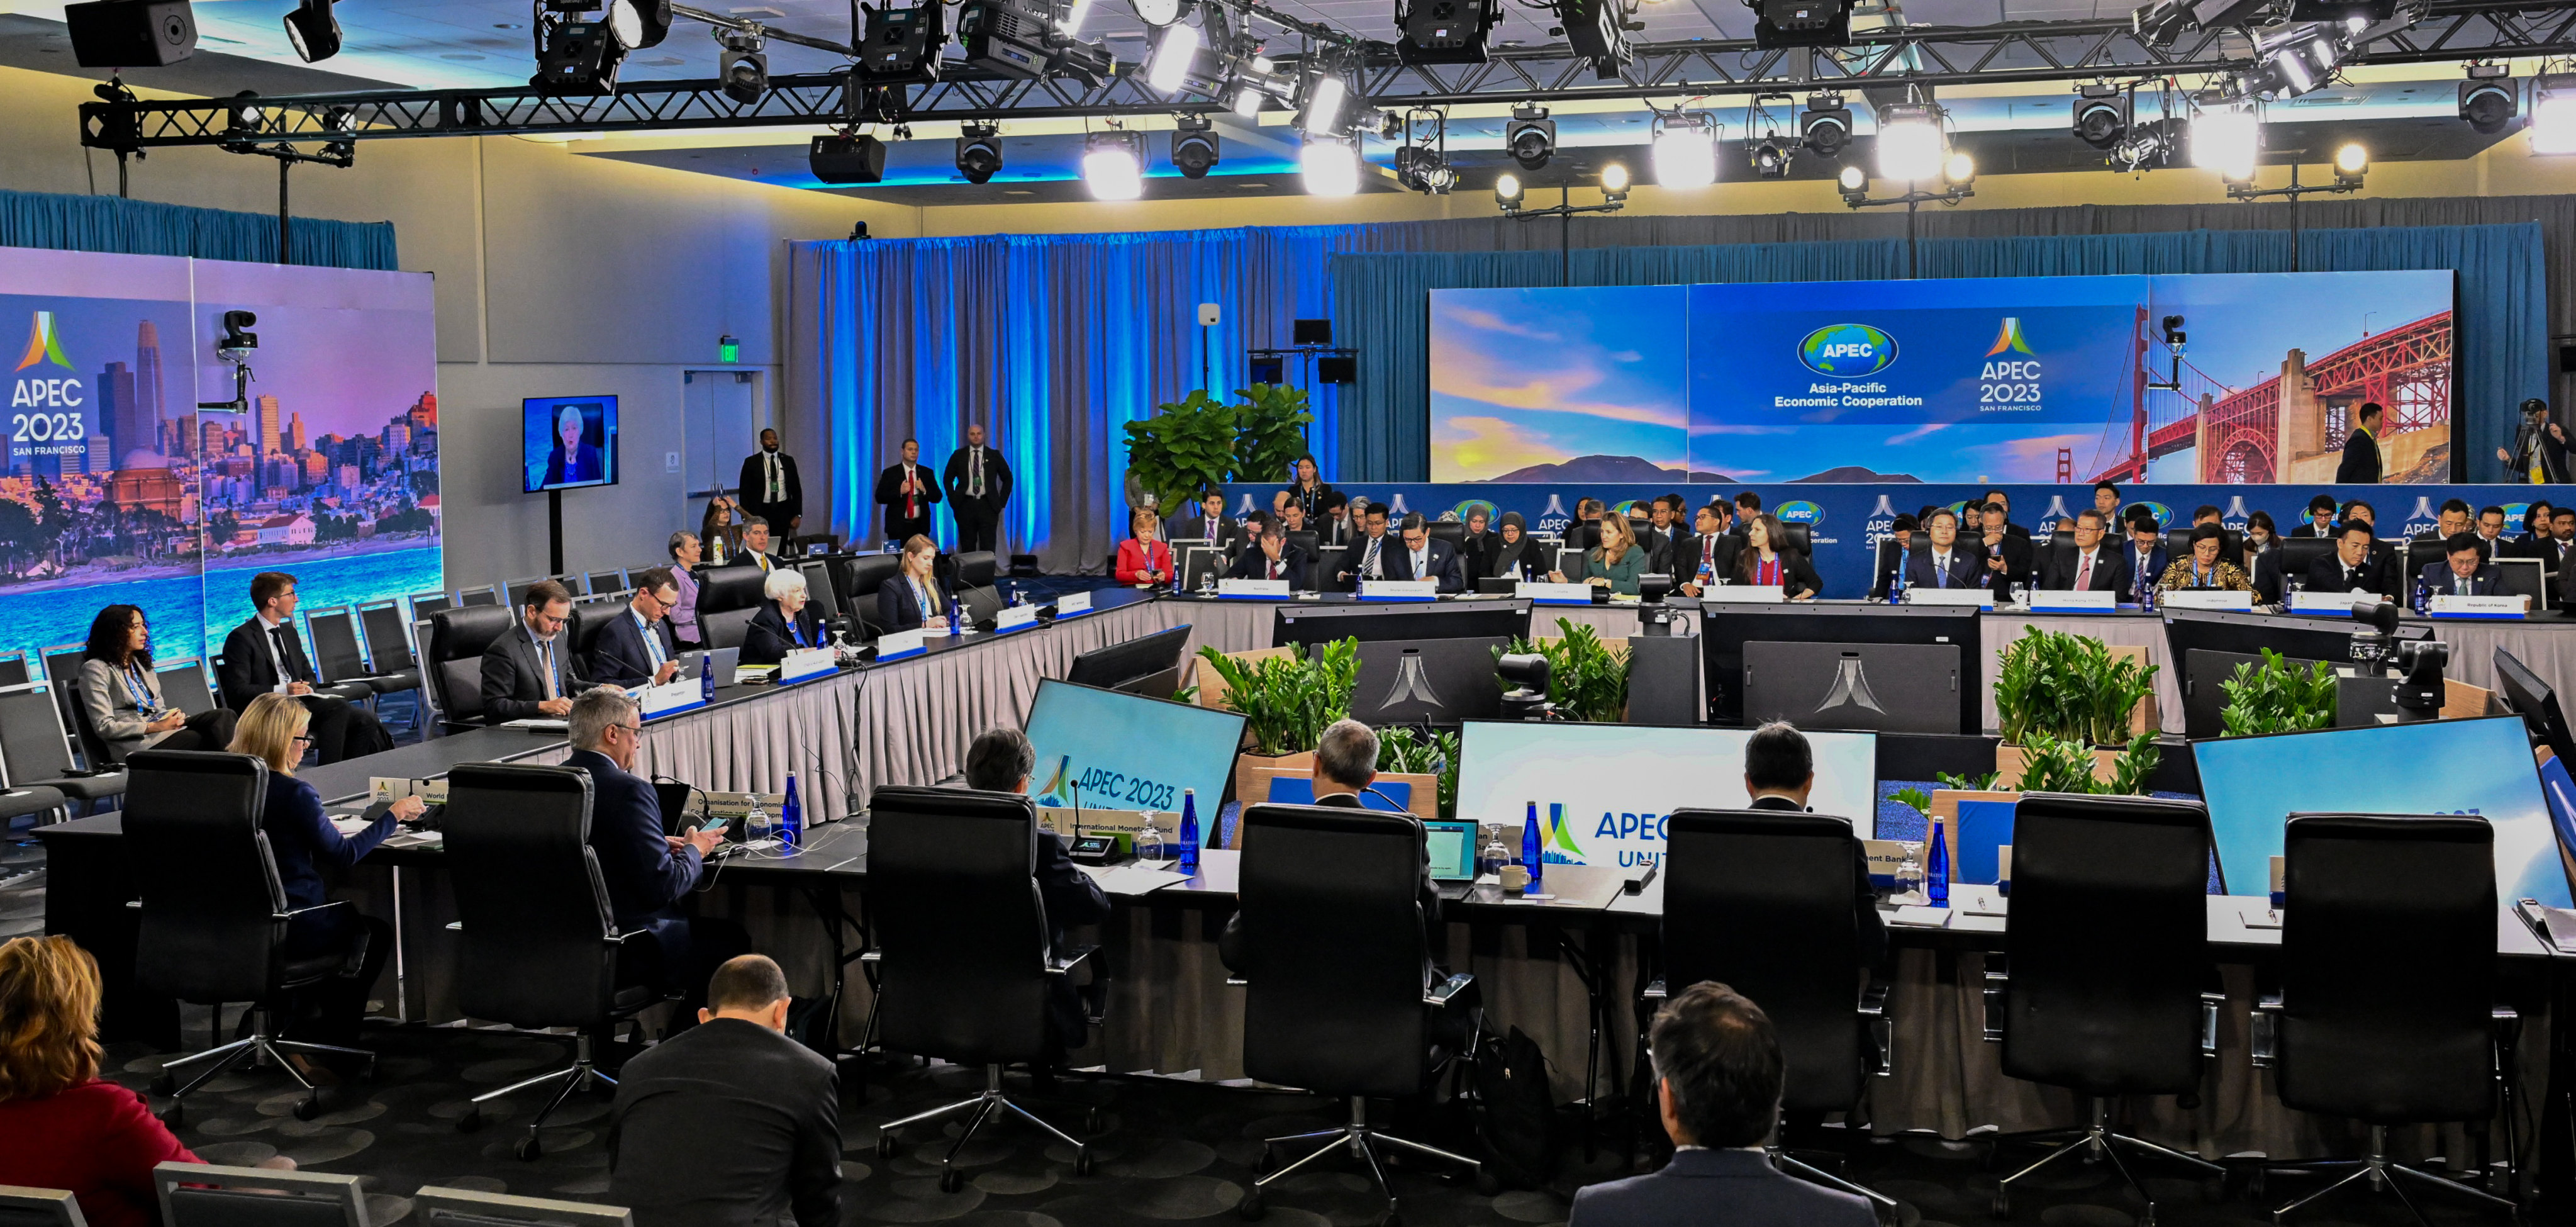 The Apec Finance Ministers’ Meeting in San Francisco. Photo: ISD